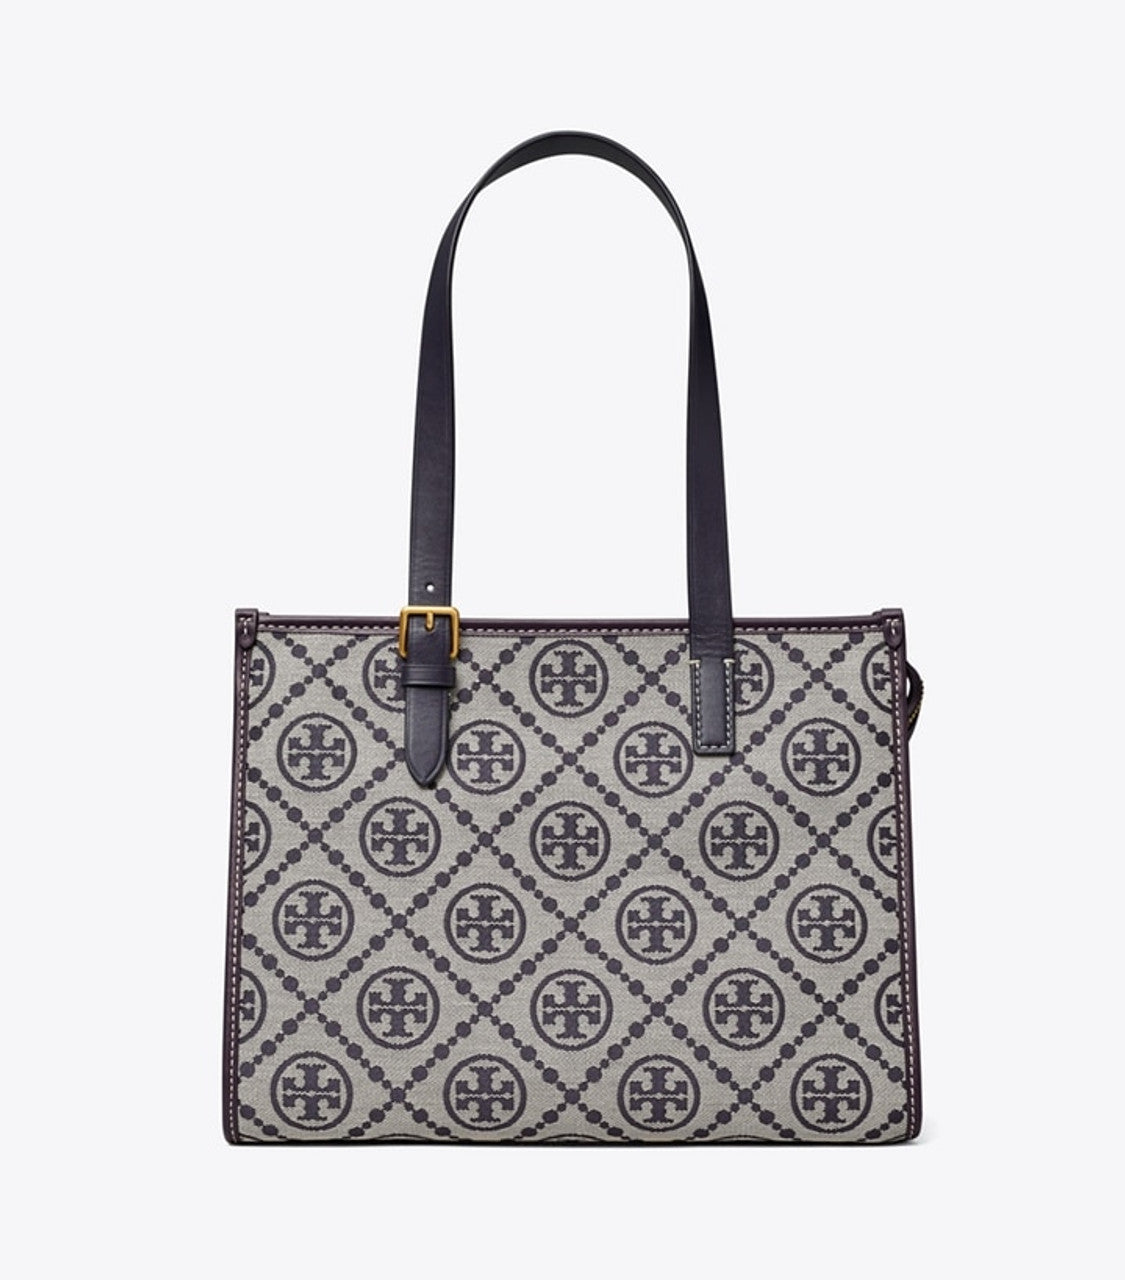 Buy Tory Burch Small T Monogram Tote Bag For Women - Tory Navy in Pakistan